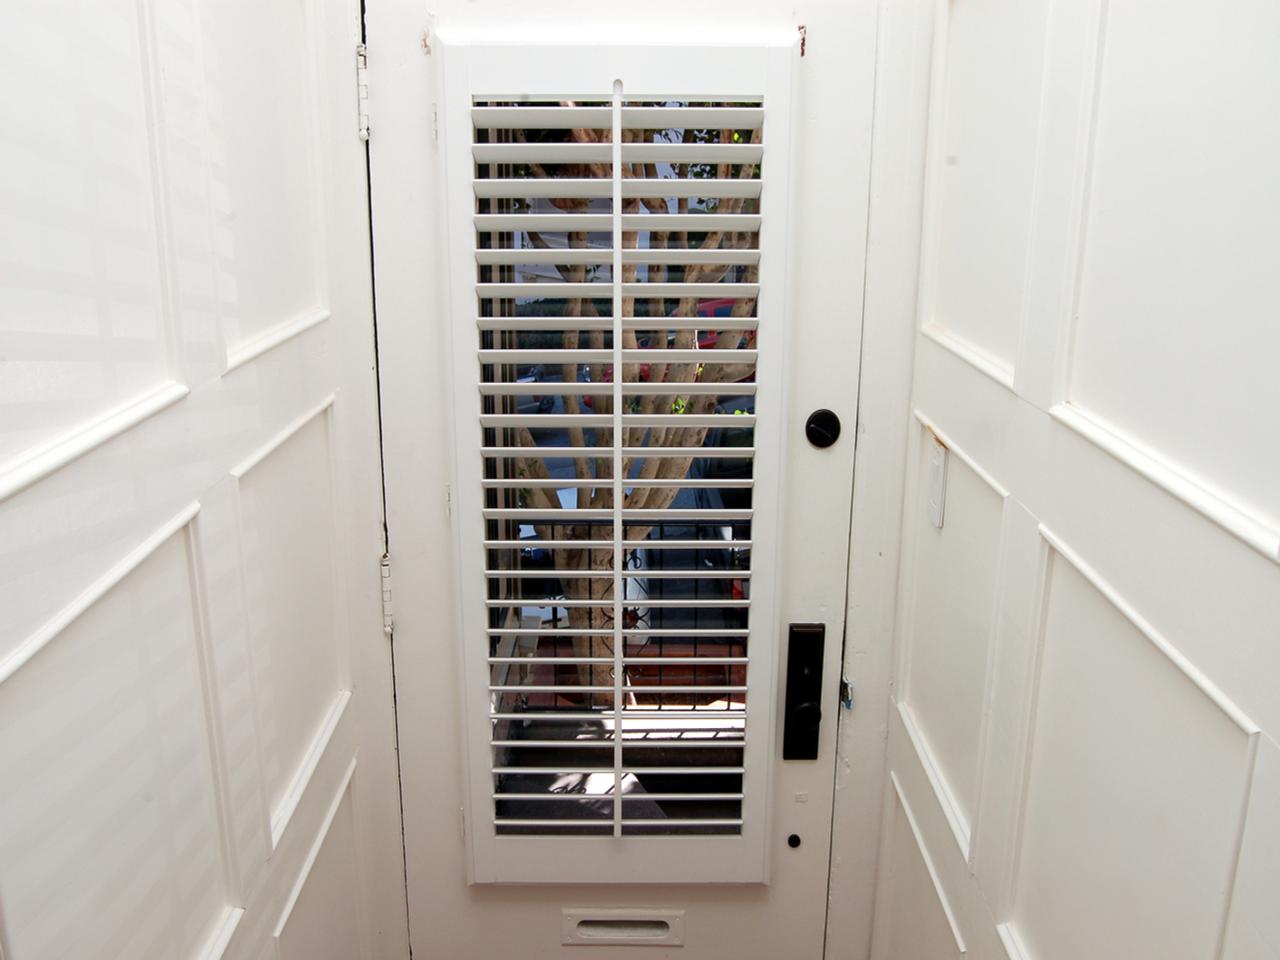 Plantation shutters on a door with glass